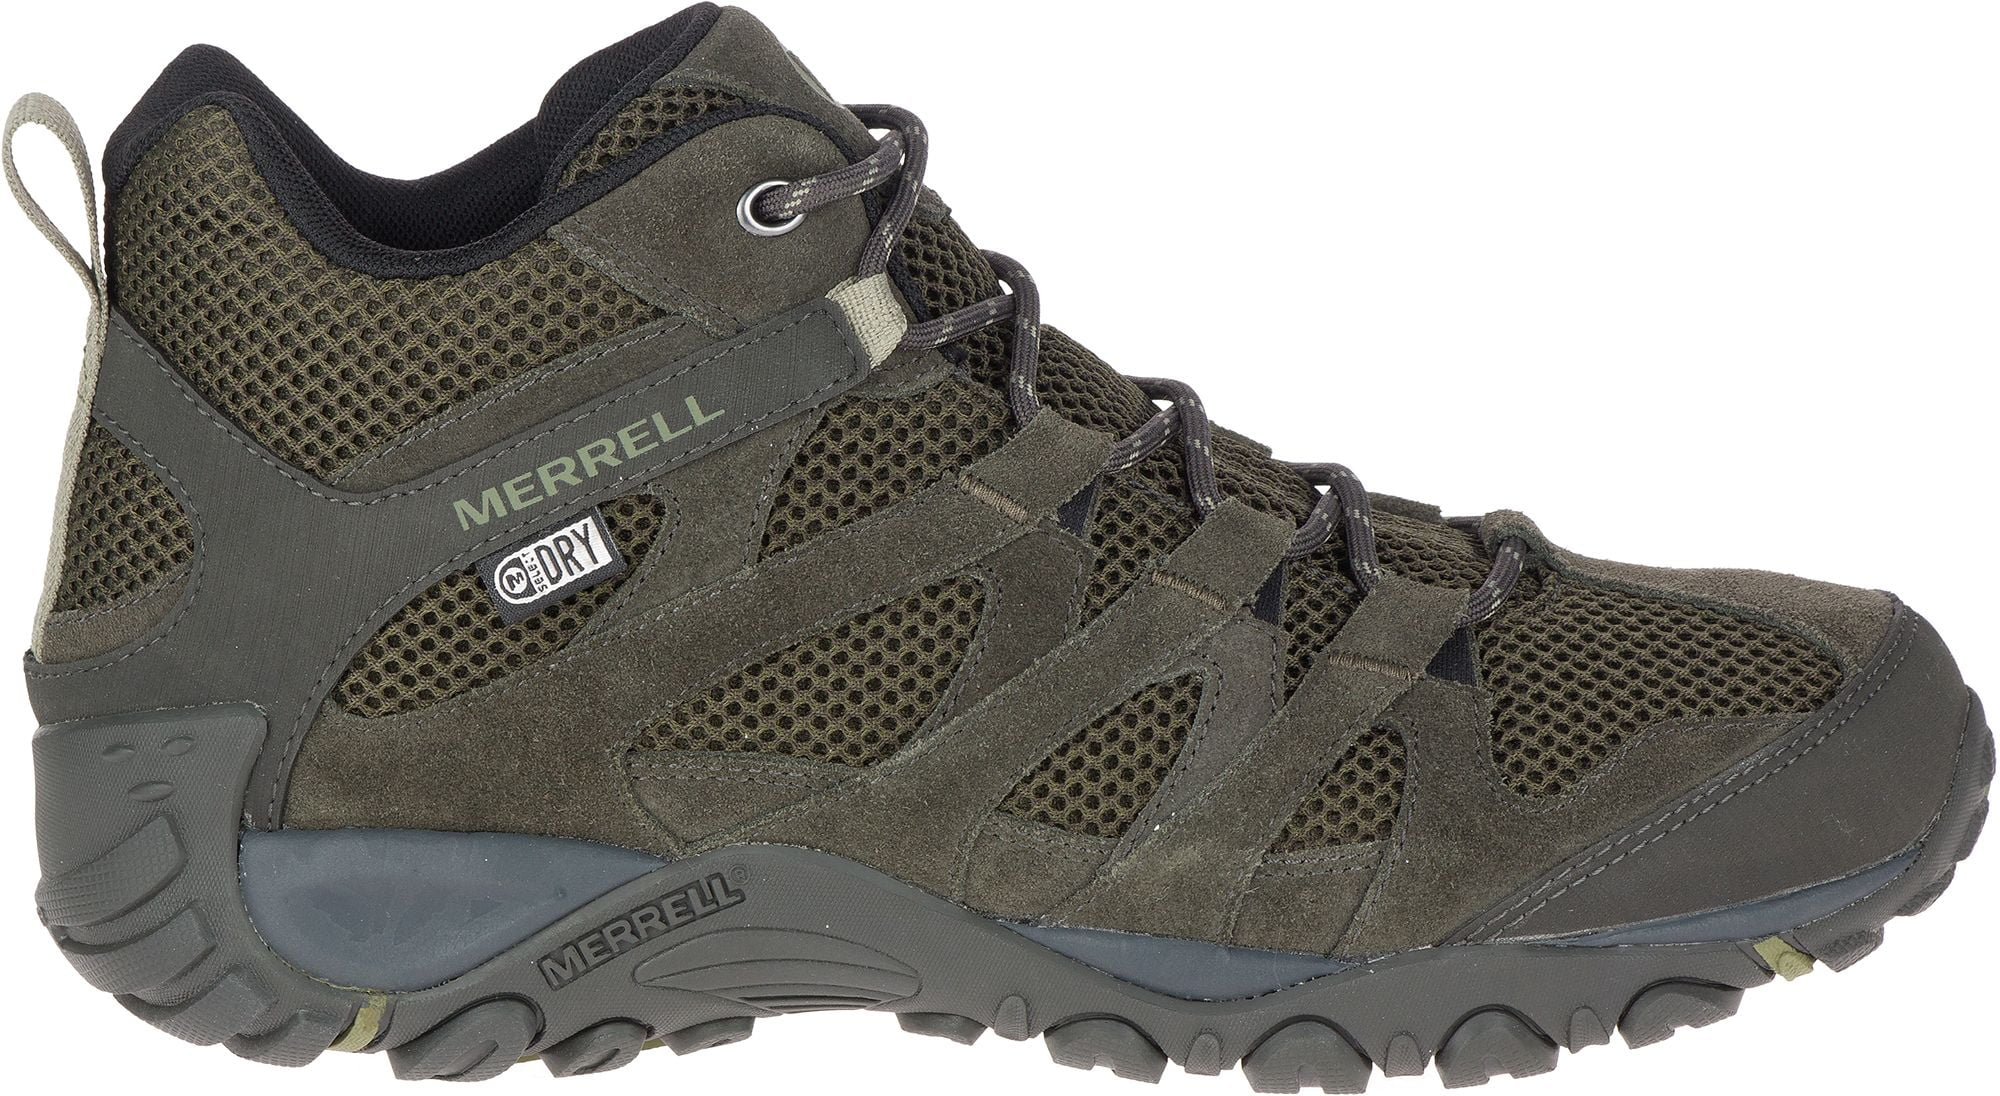 Where to buy merrell shoes